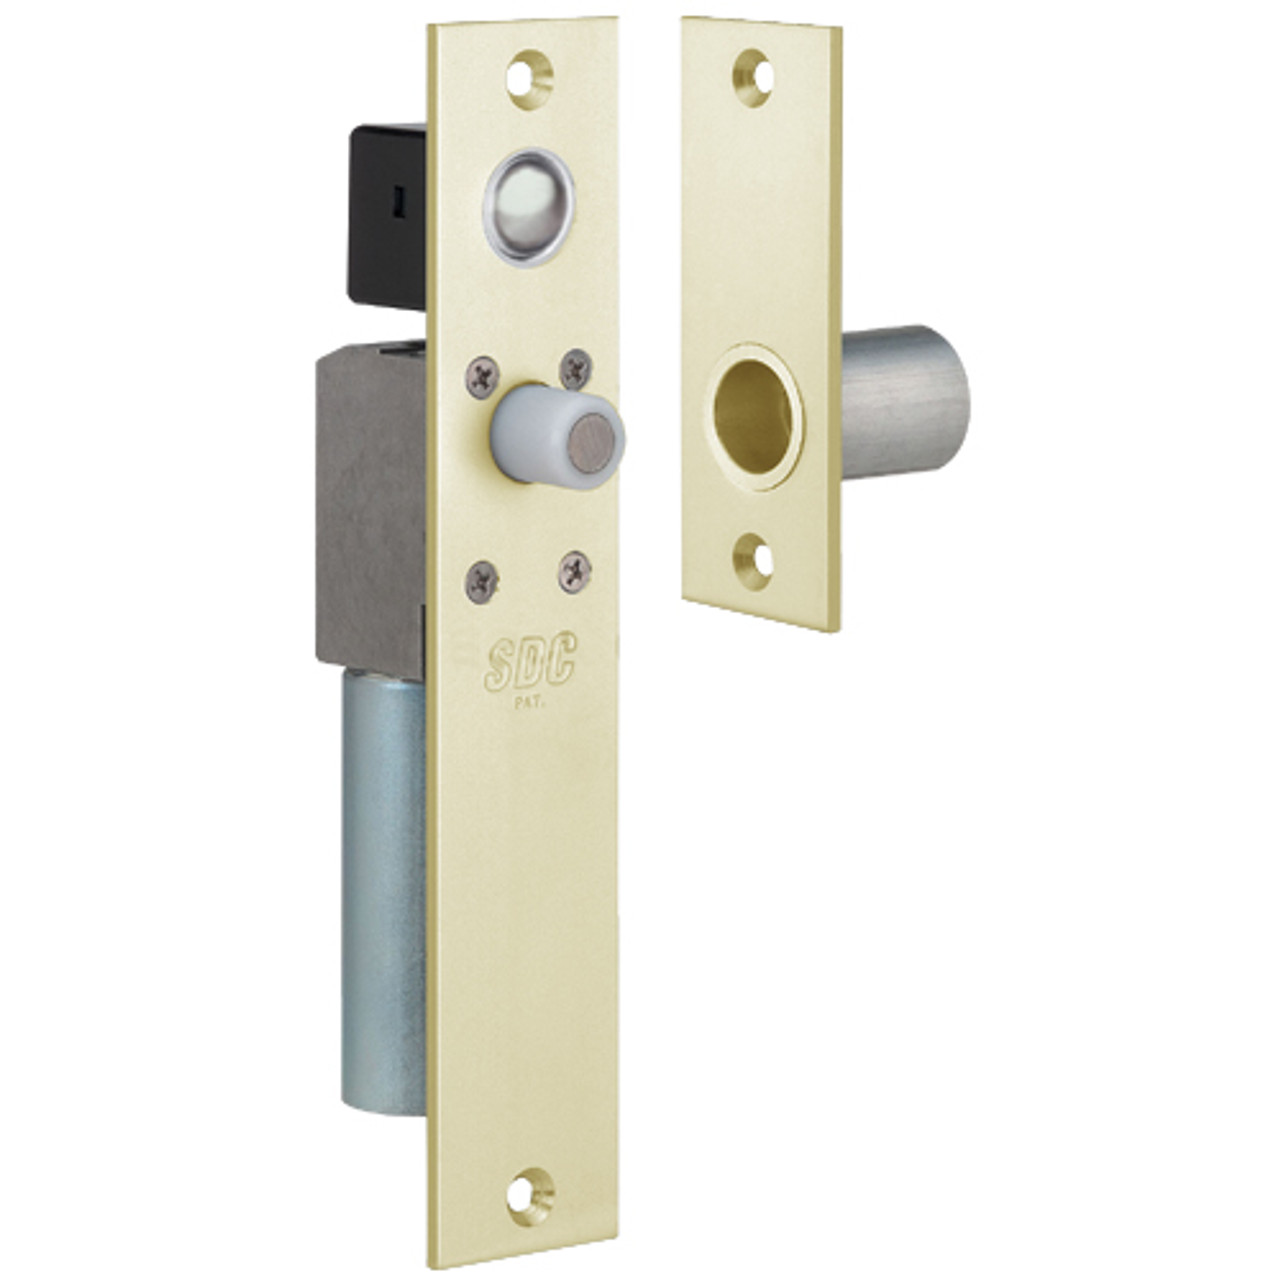 FS23MID SDC Dual FailSafe Spacesaver Mortise Bolt Lock in Dull Brass